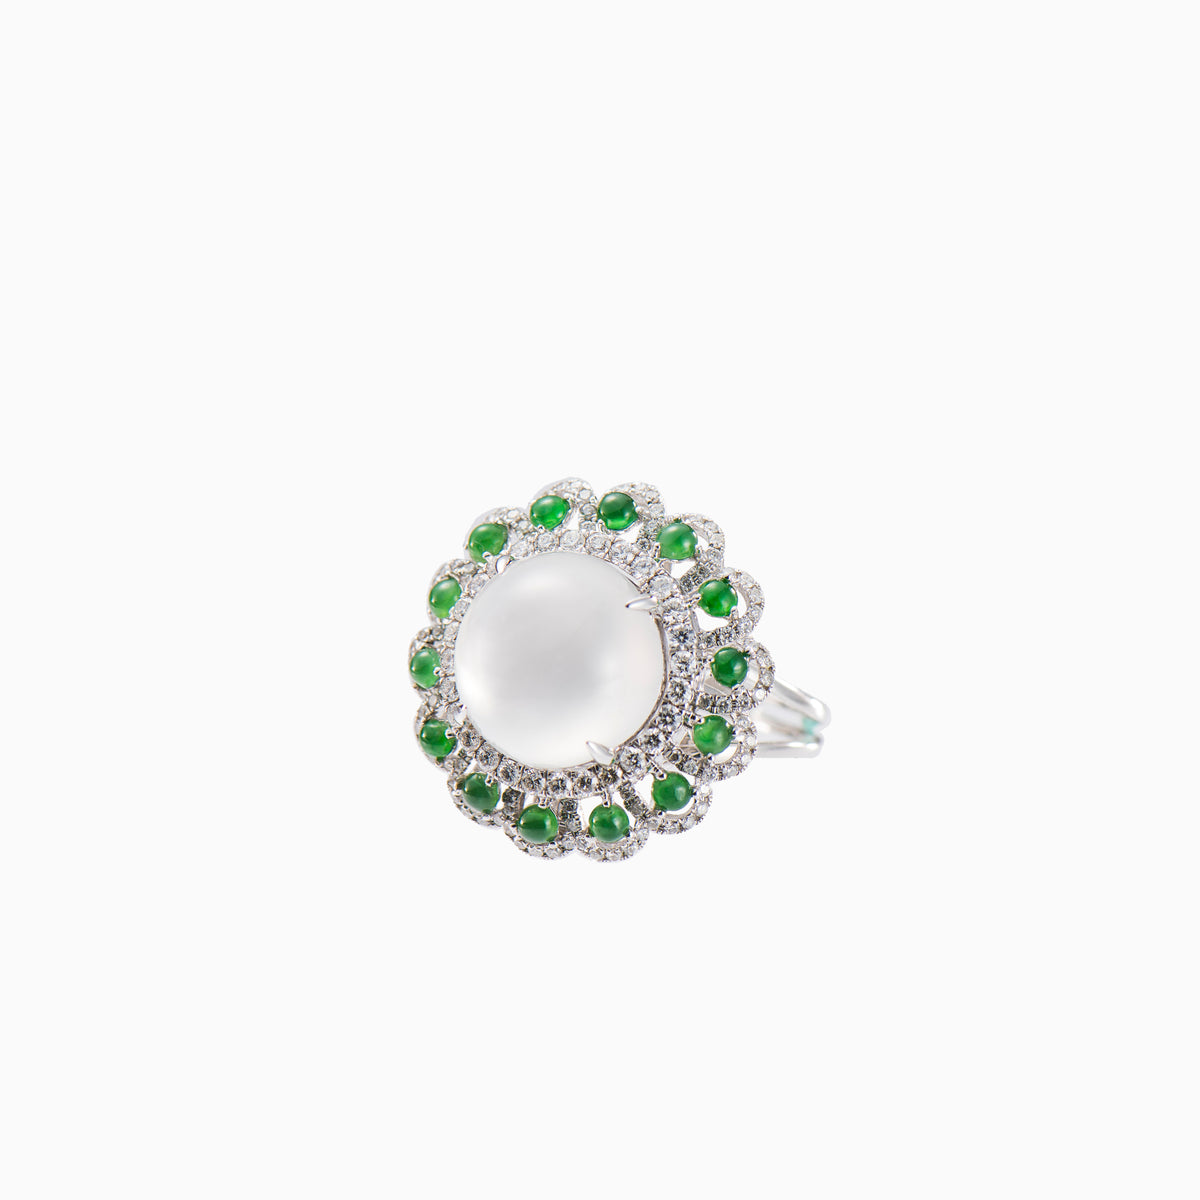 A stylish white jade ring called &quot;Aura&quot; surrounded by diamonds and green jade